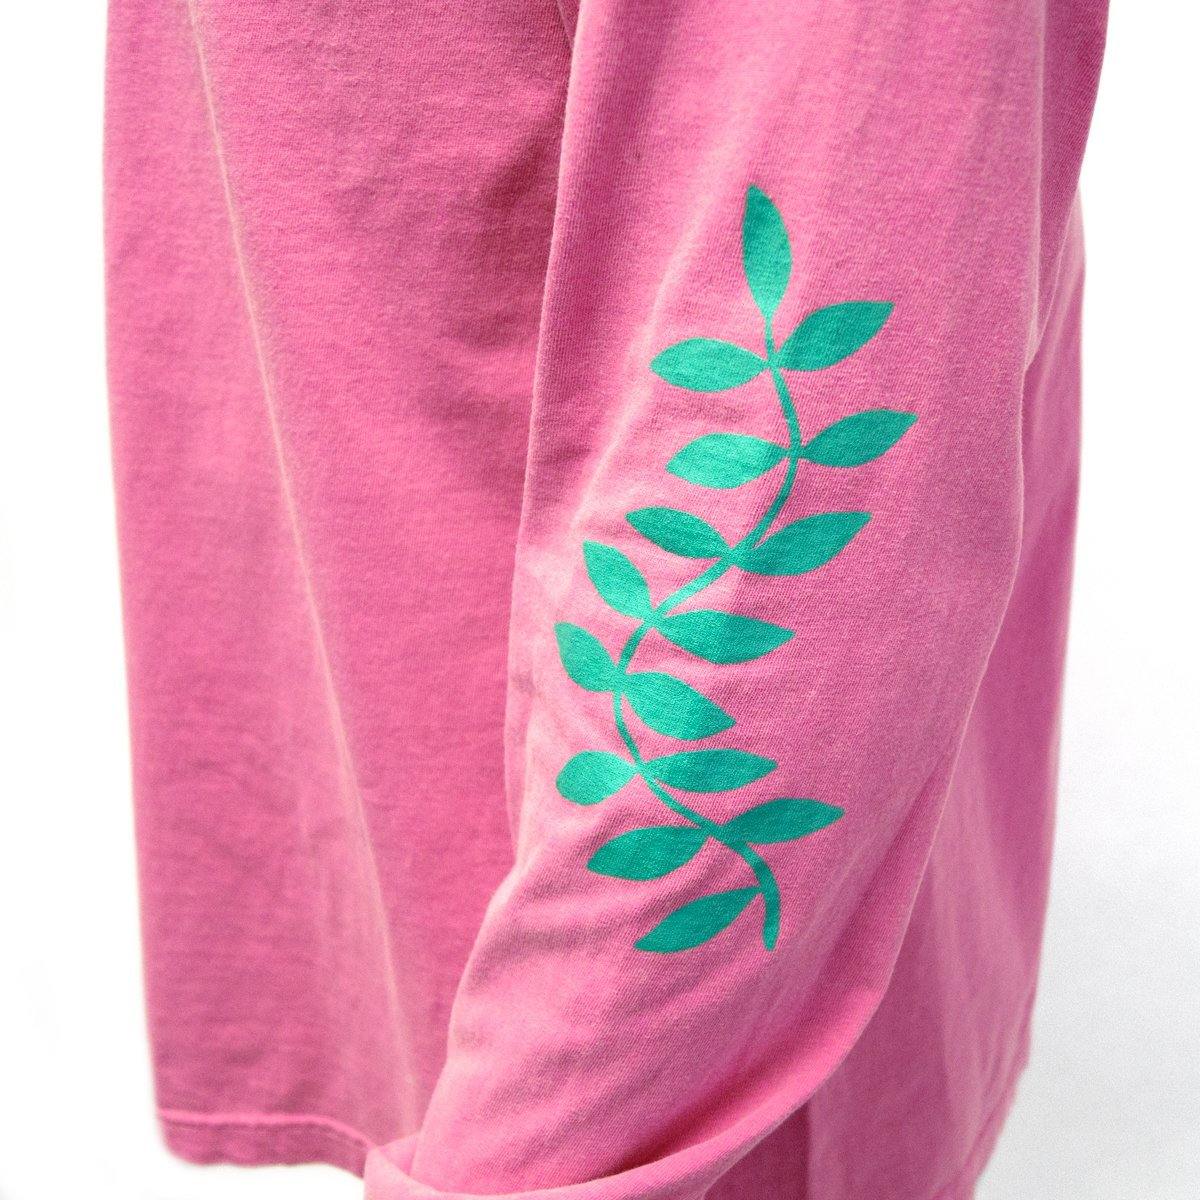 Buy – Turnover "Vines" Long Sleeve – Band & Music Merch – Cold Cuts Merch